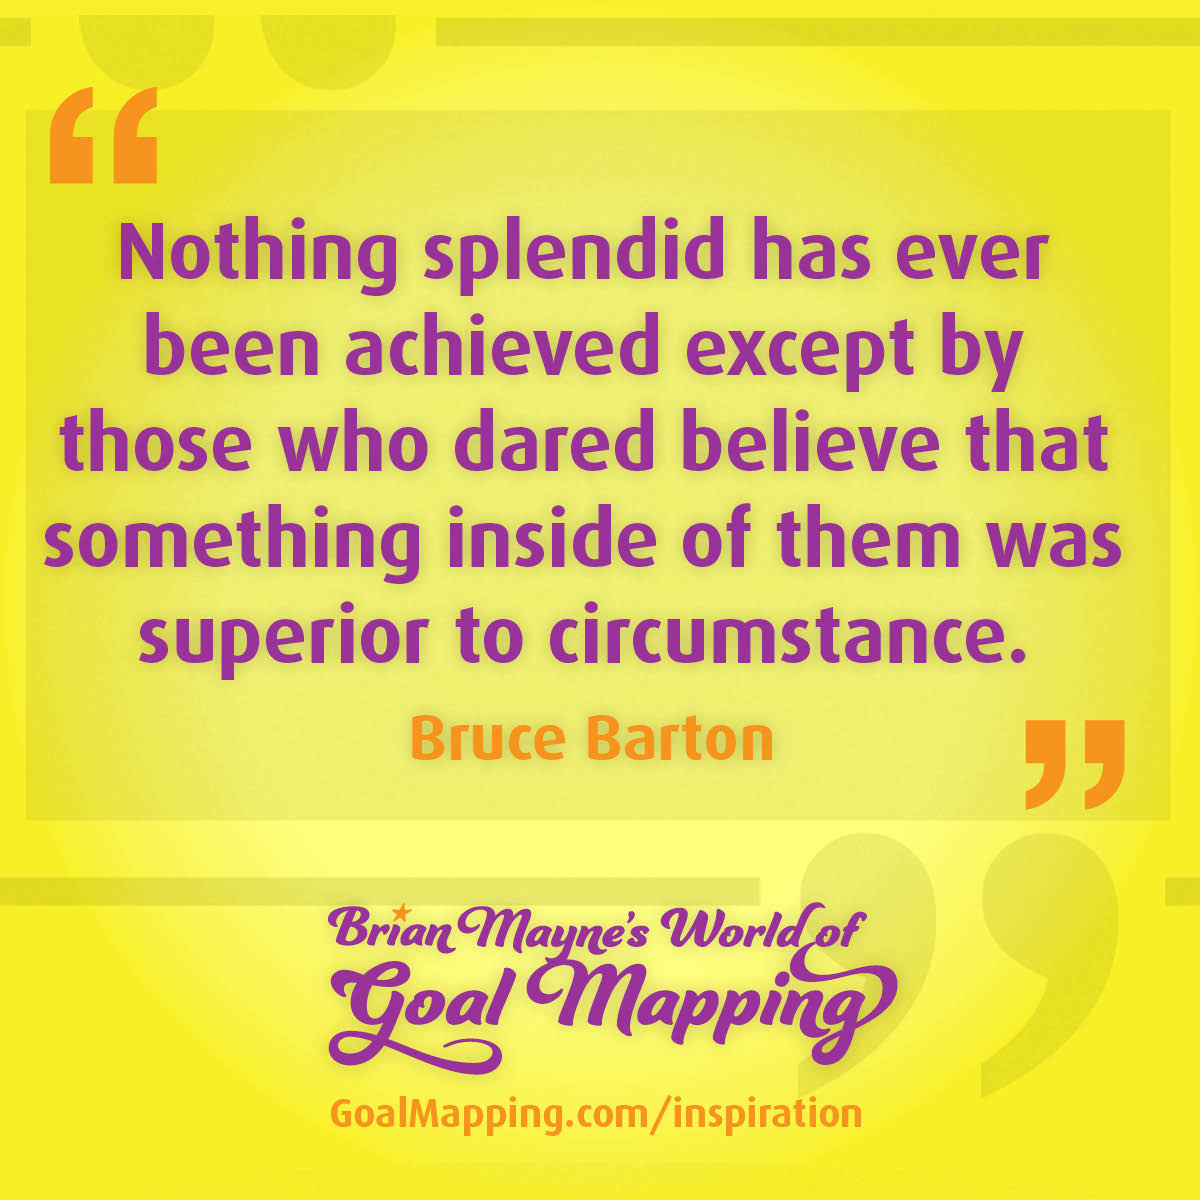 "Nothing splendid has ever been achieved except by those who dared believe that something inside of them was superior to circumstance." Bruce Barton